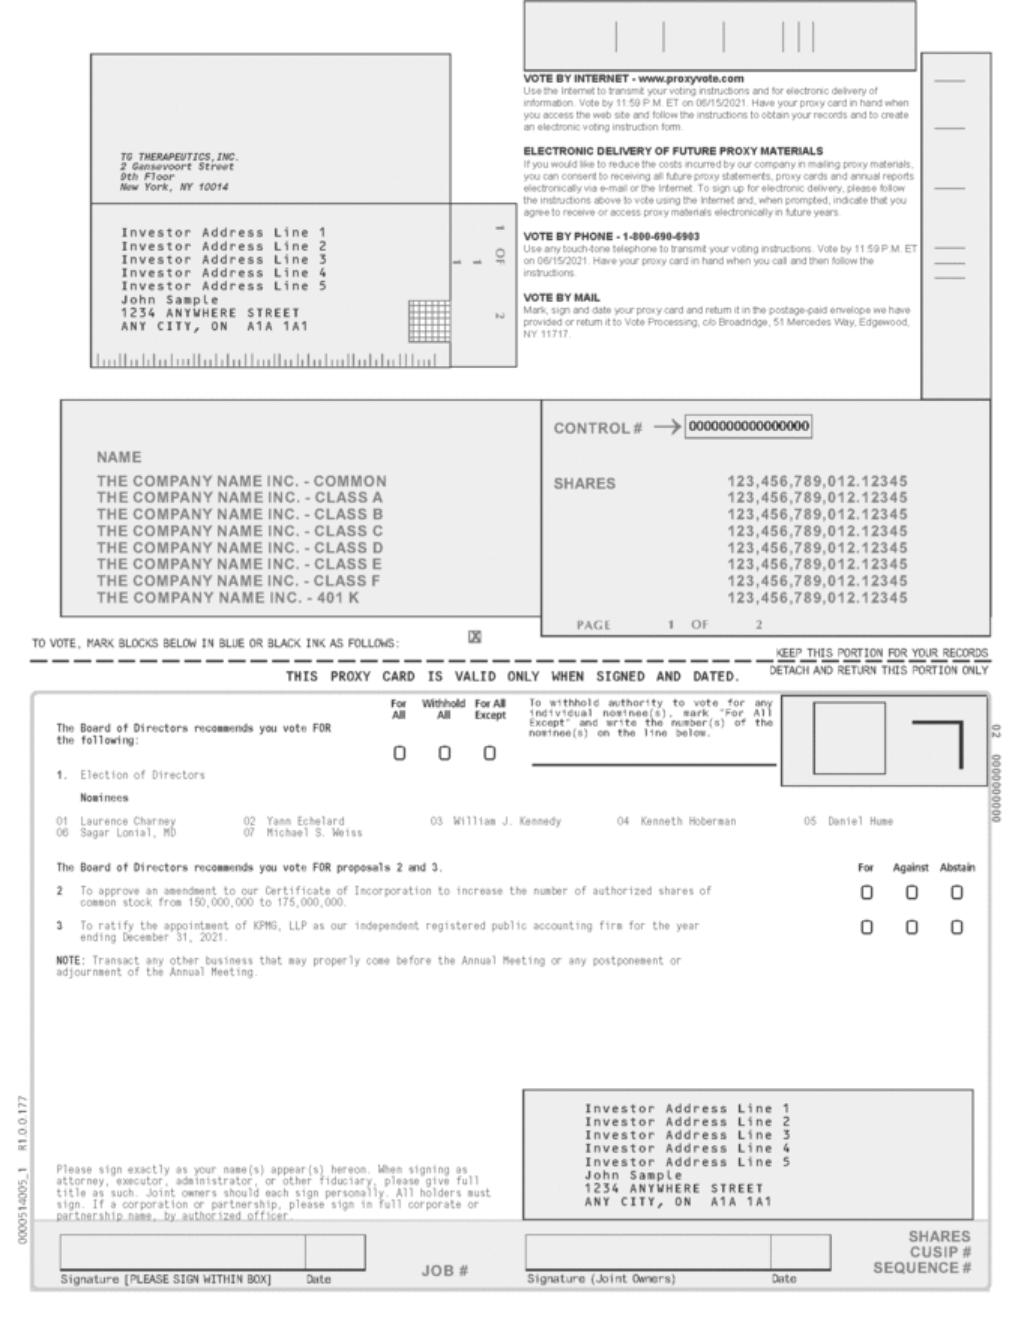 New Microsoft Word Document_registered_page_1.gif